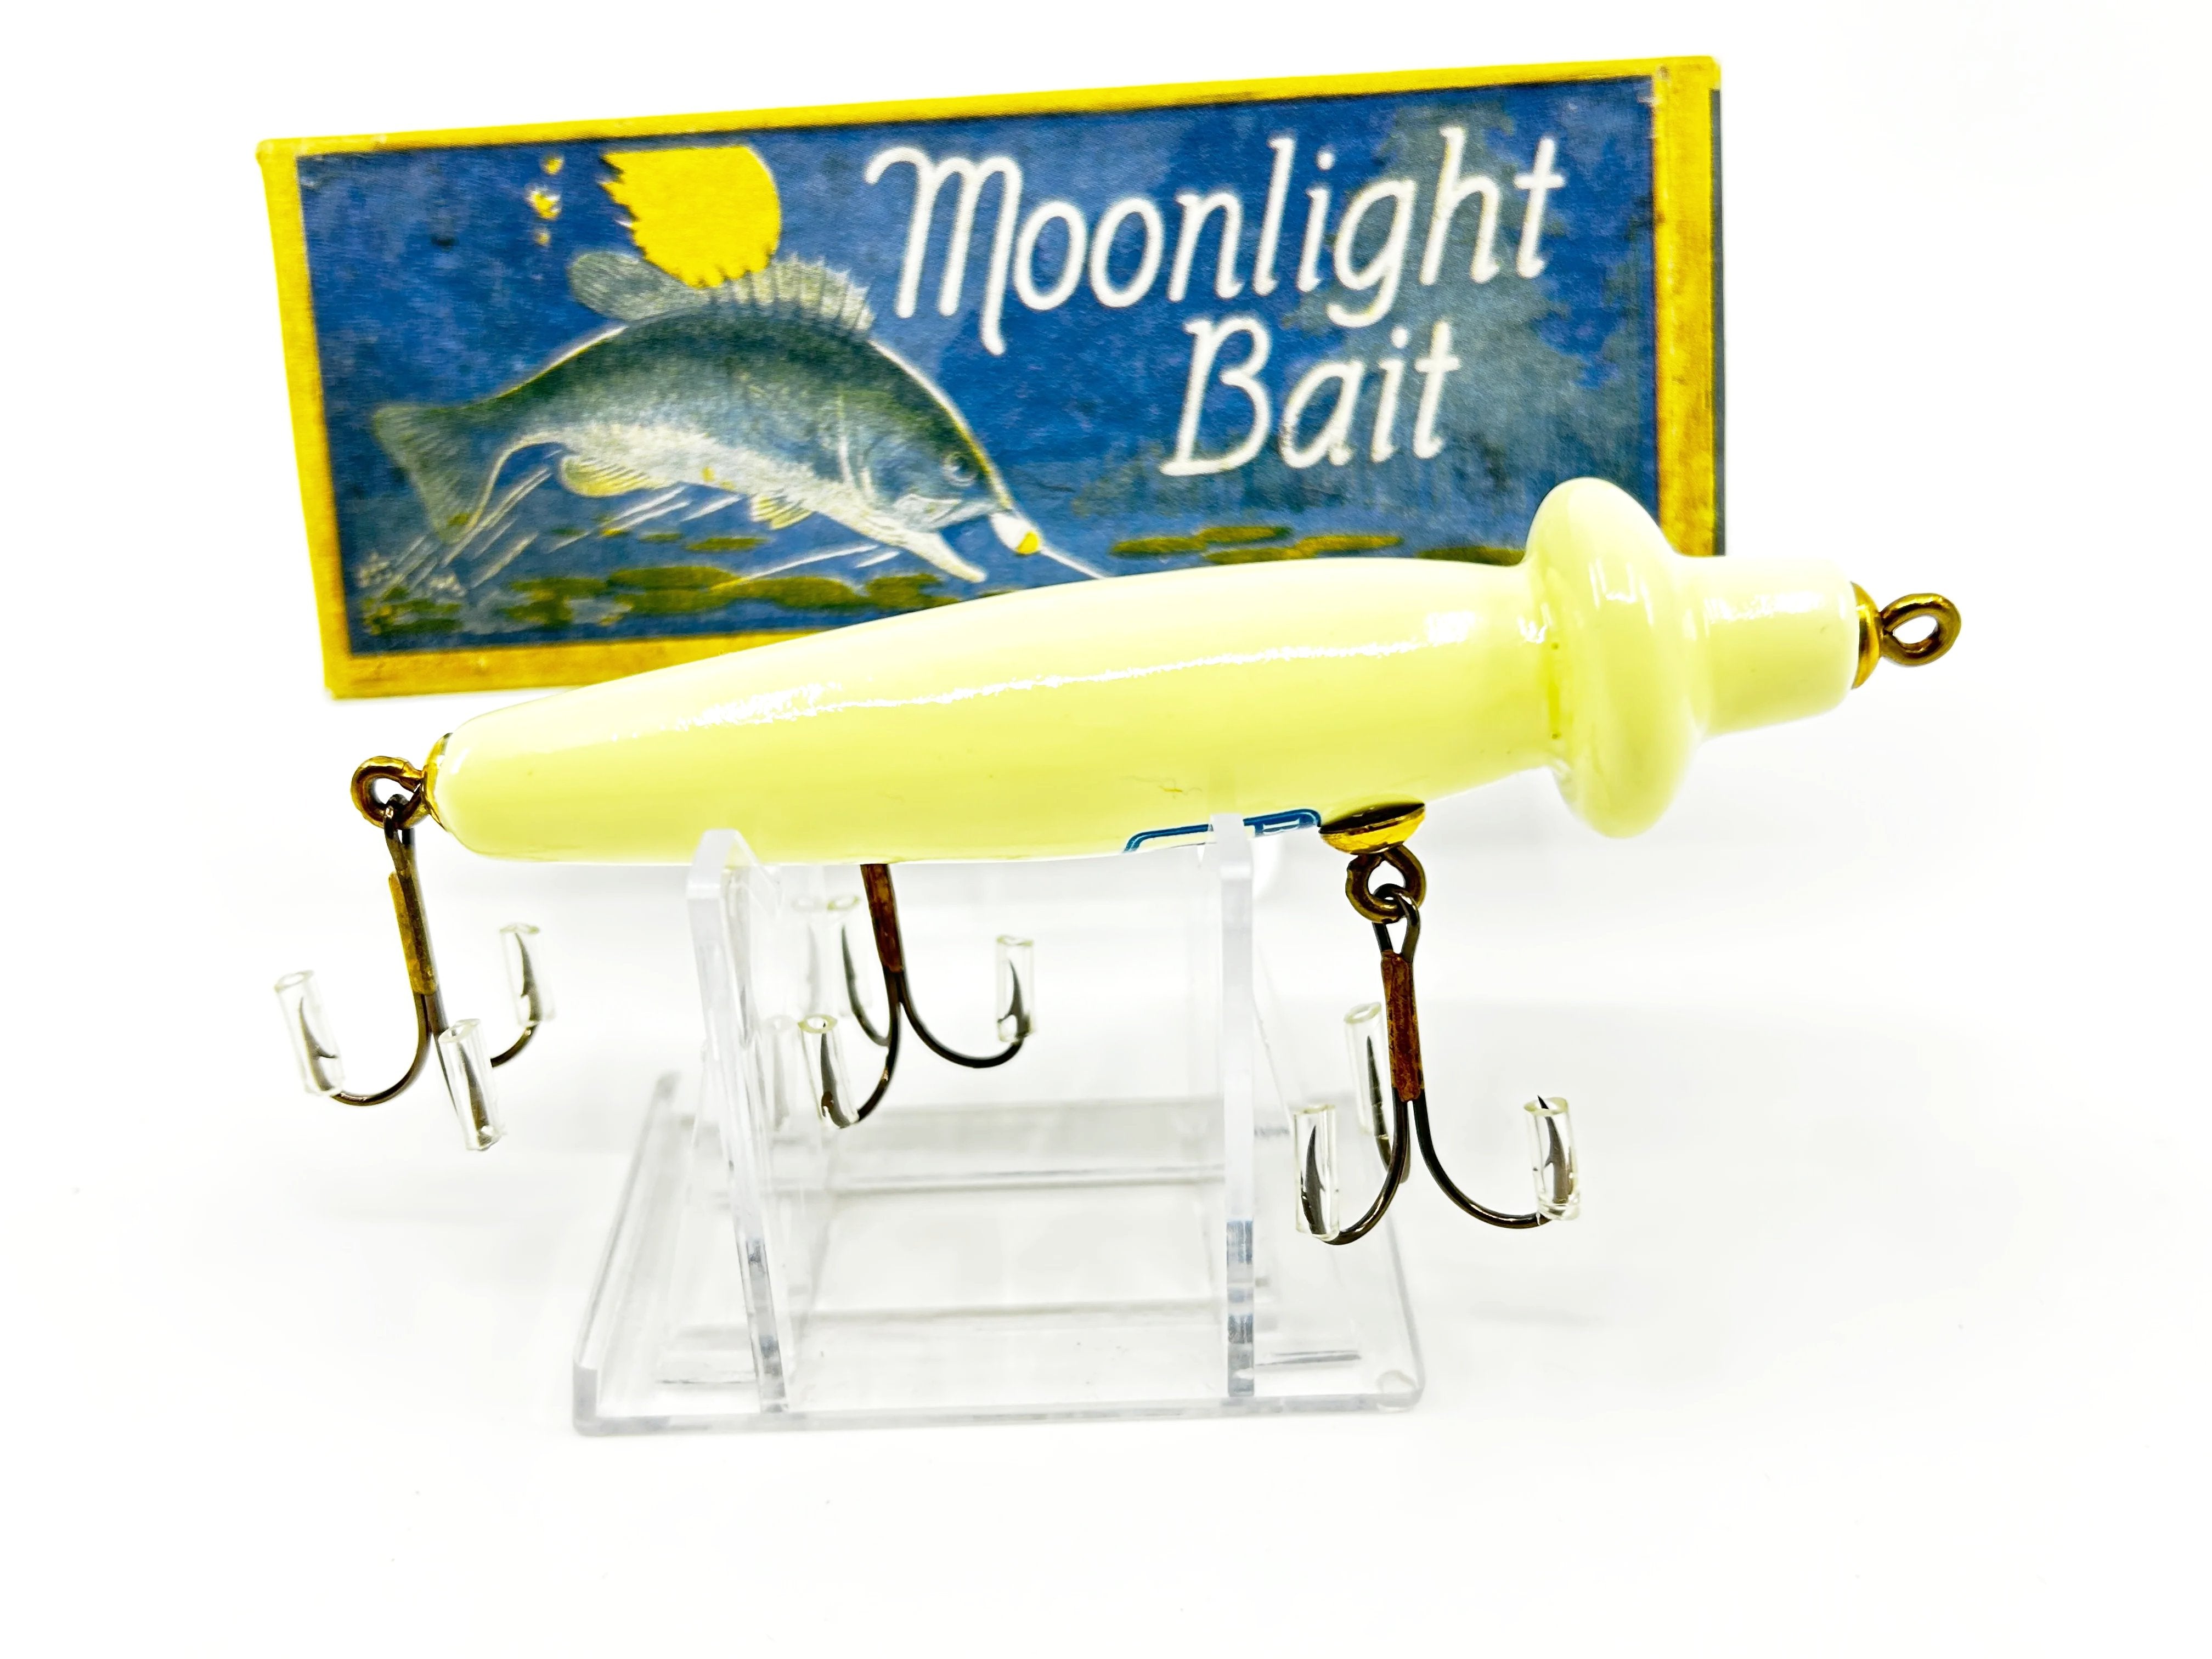 Moonlight Bait / Paw Paw No. 1 BASS Reproduction with Box – My